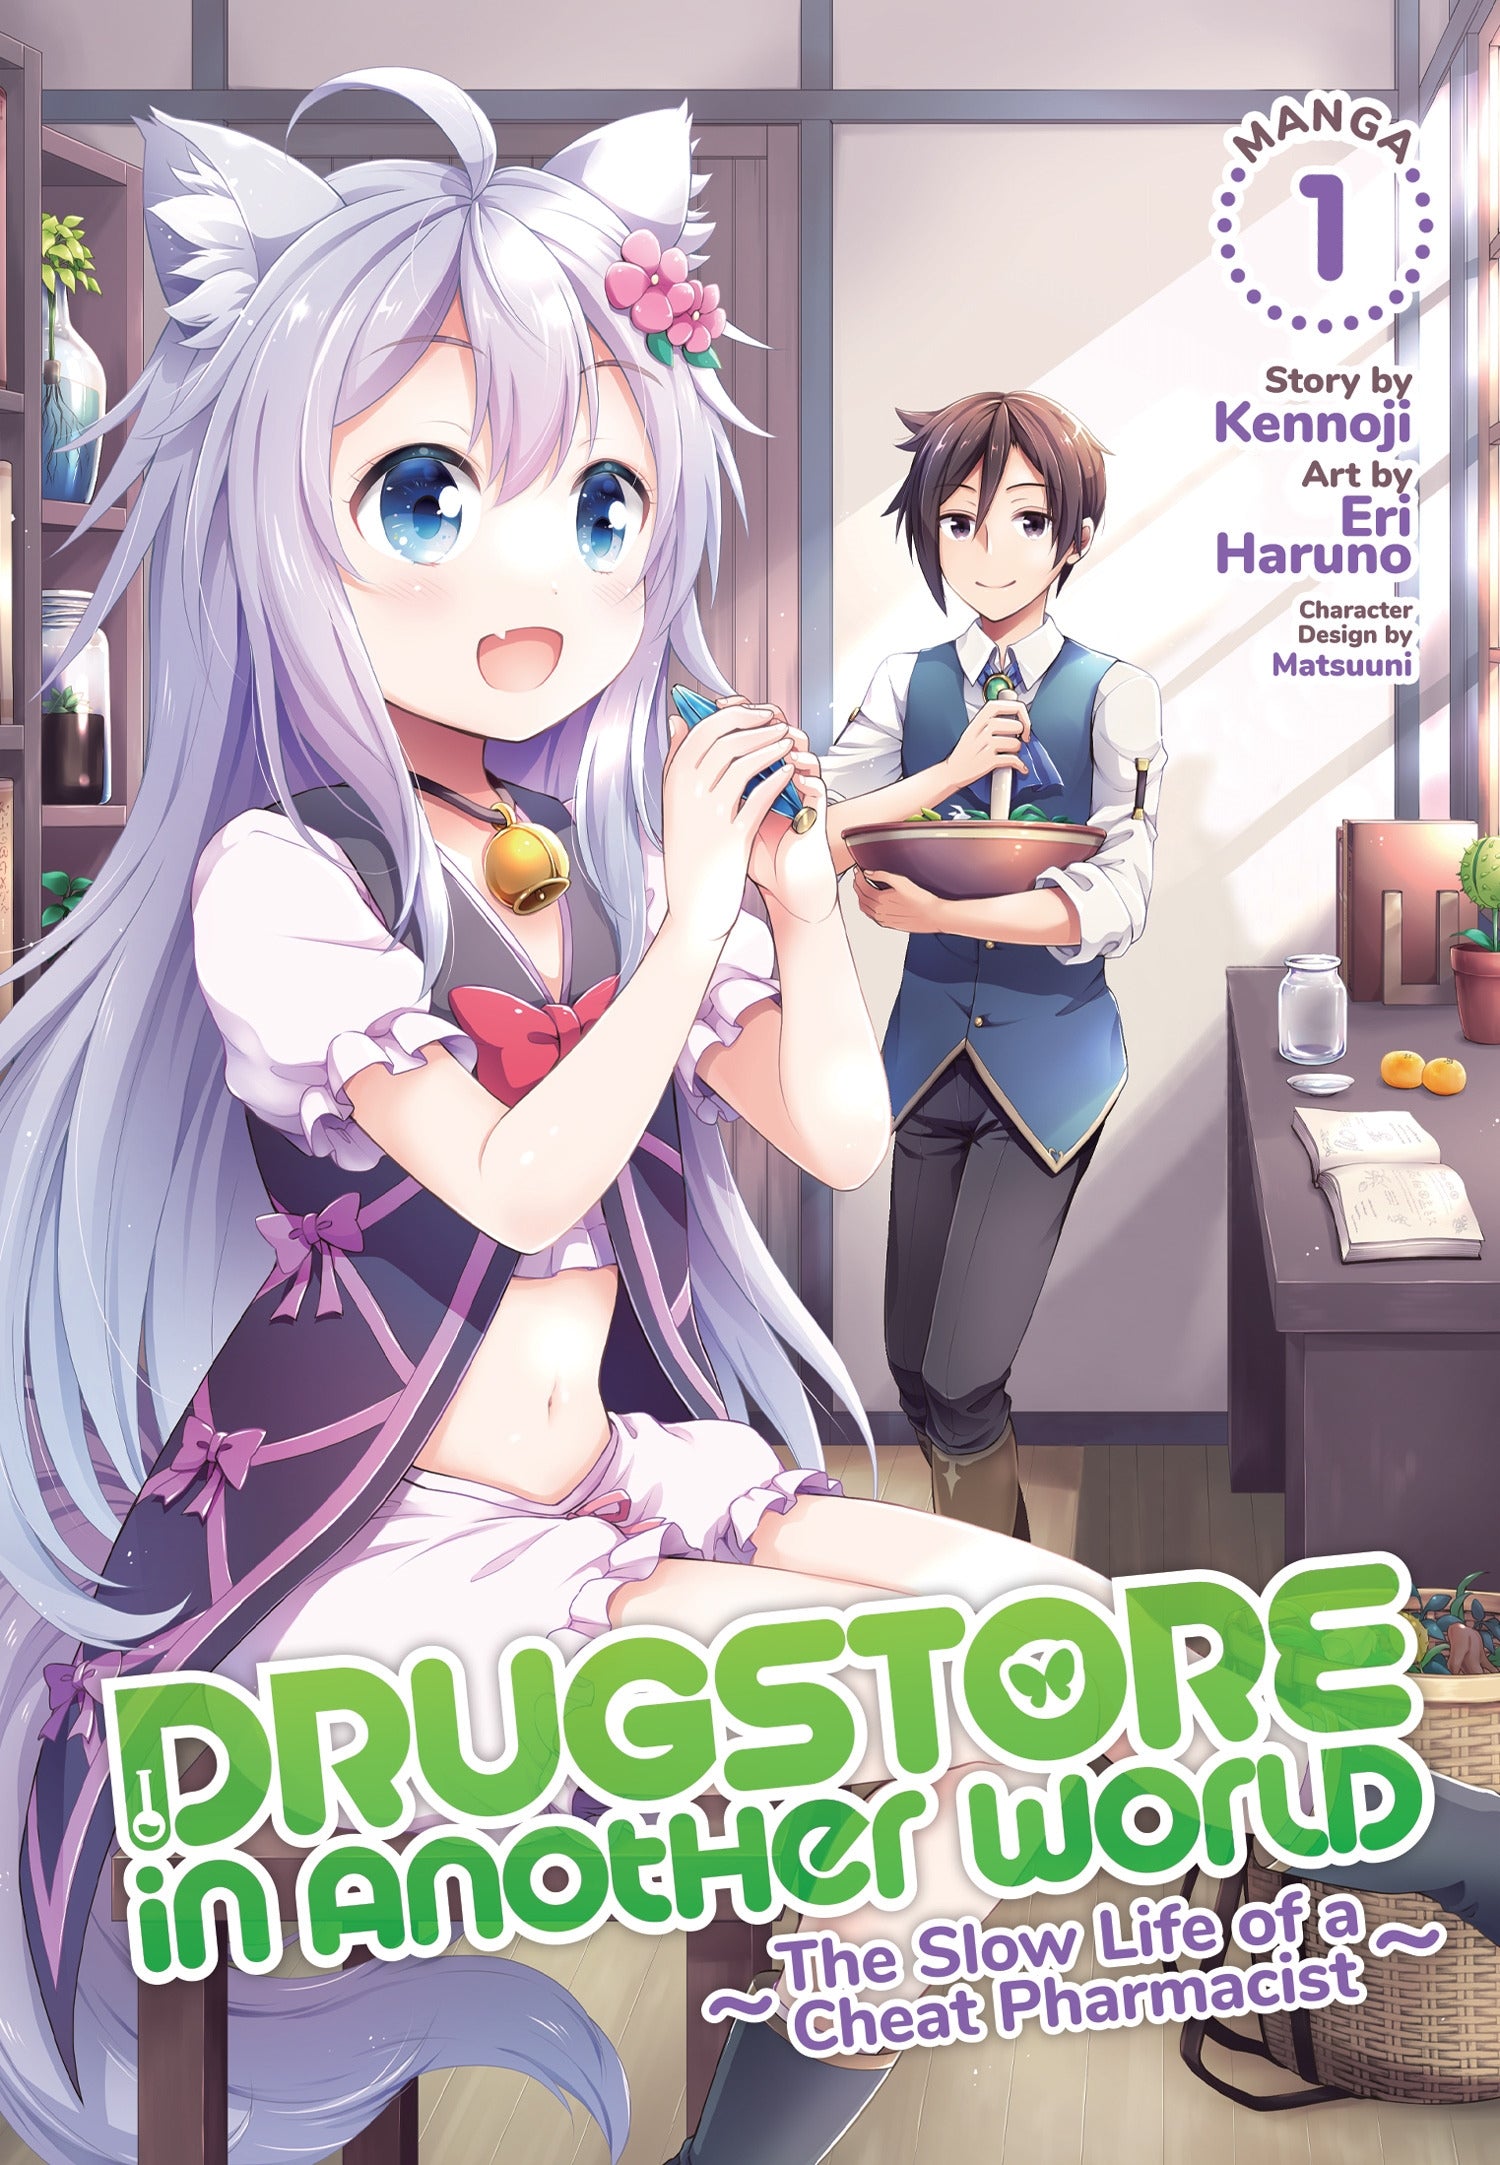 Drugstore in Another World : The Slow Life of a Cheat Pharmacist (Manga) Vol. 1 - Manga Warehouse